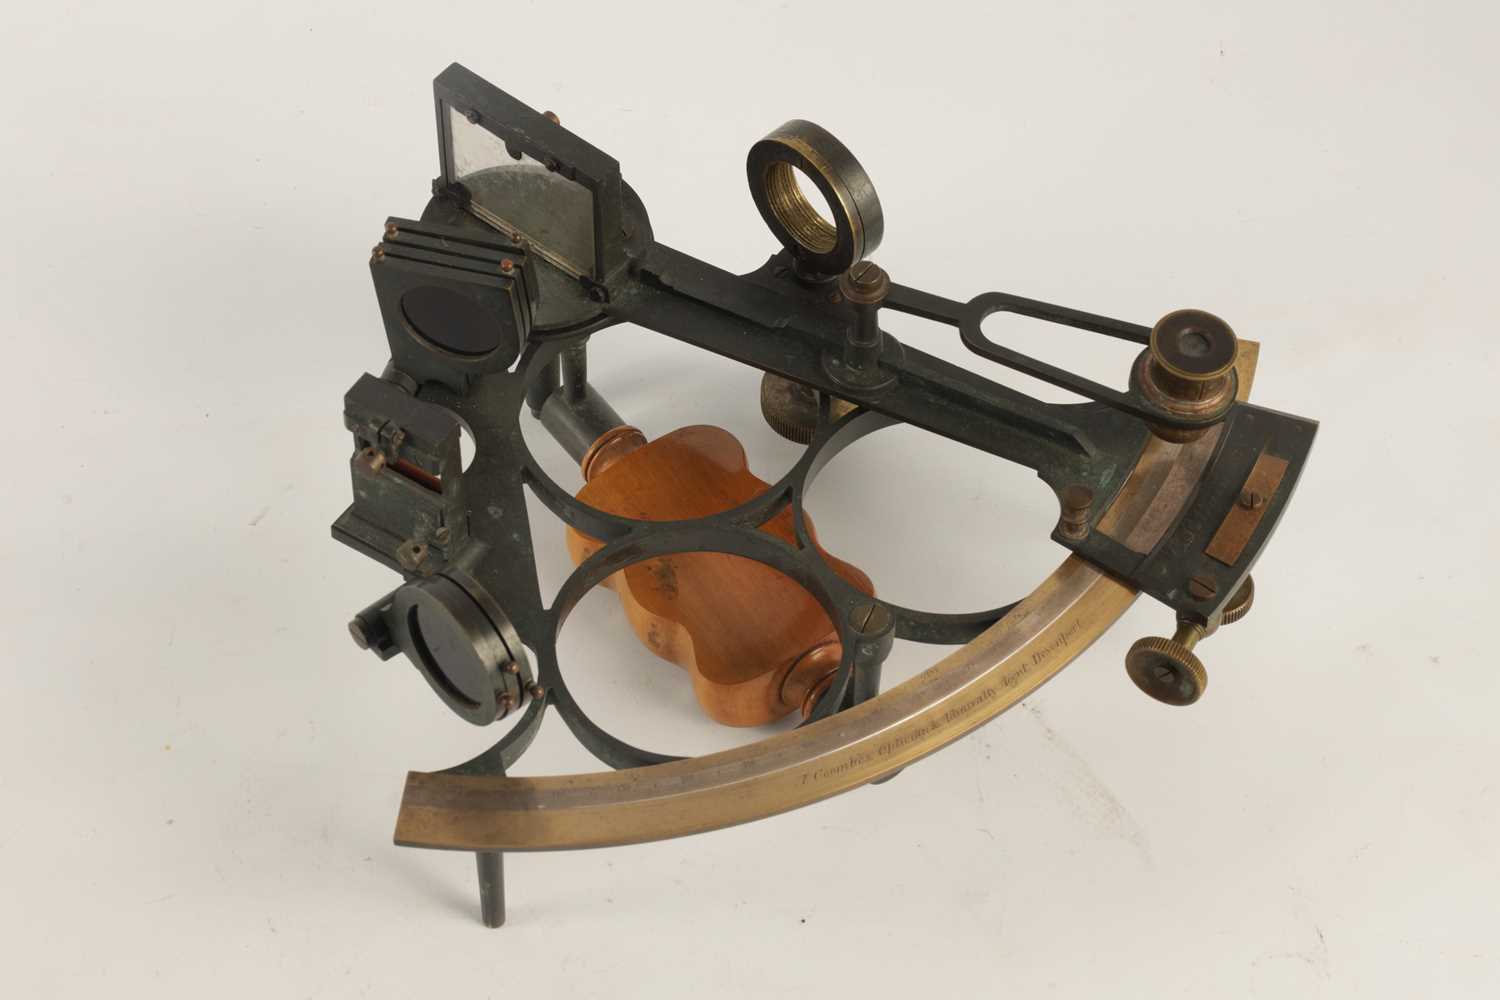 J. COOMBES, OPTICIAN & ADMIRALTY AGENT, DEVONPORT. A LATE 19TH CENTURY BRASS FRAMED SEXTANT IN ORIGI - Image 3 of 17